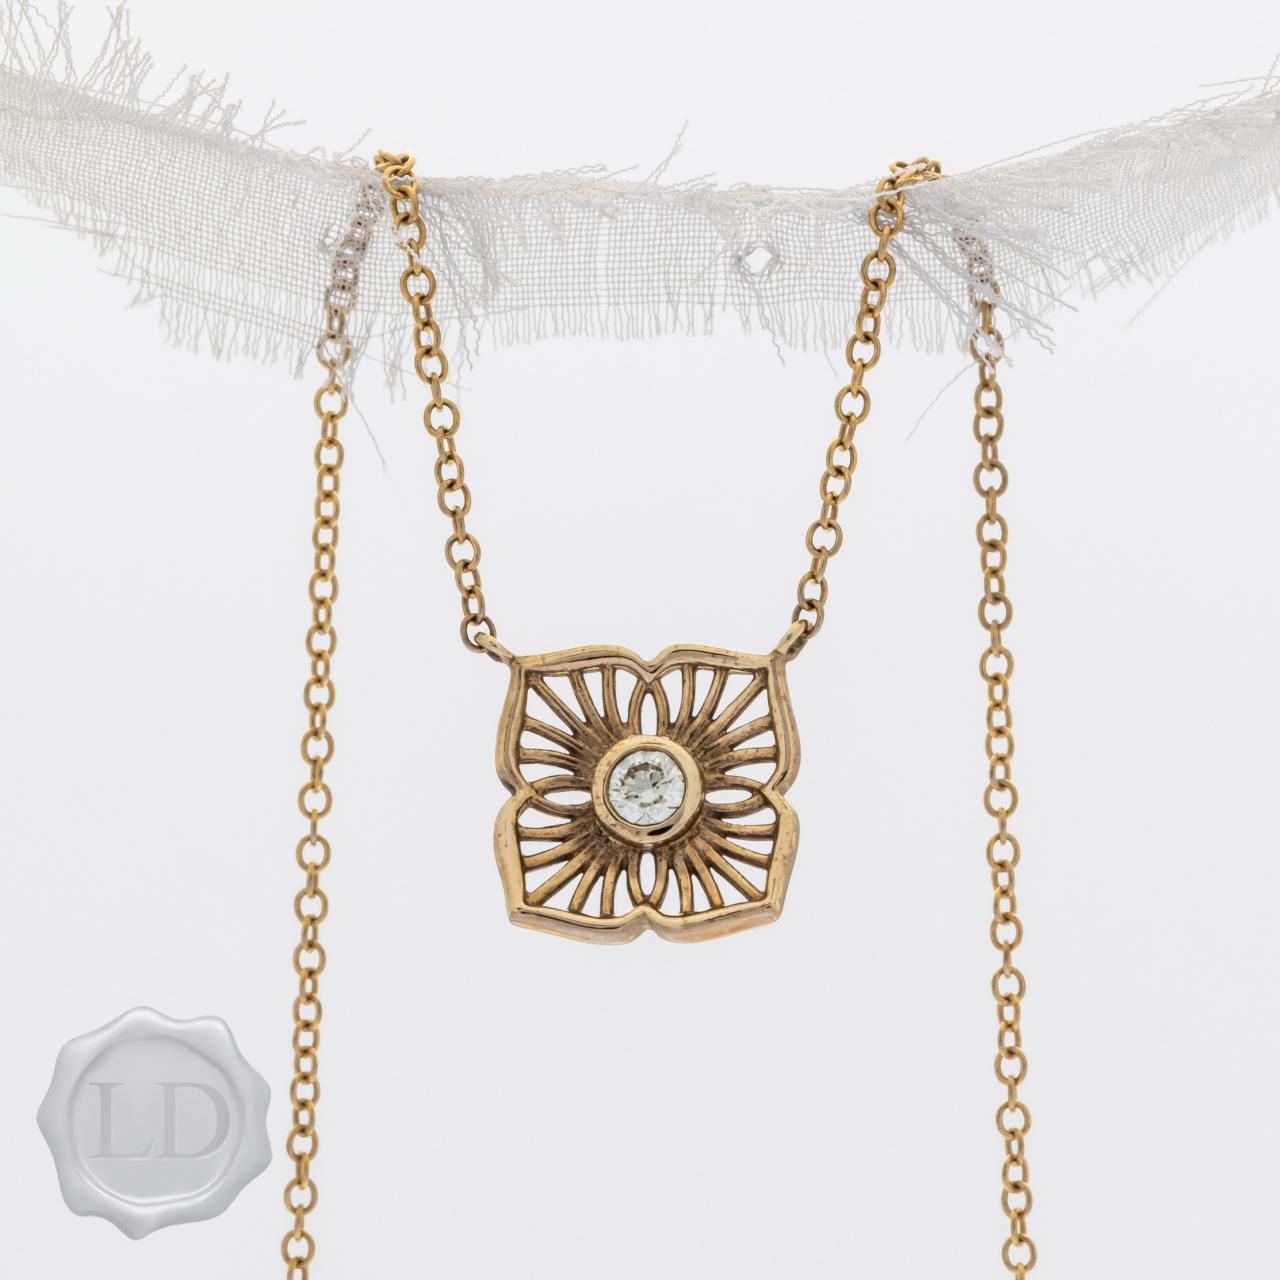 LD Diamond Lily necklace in yellow